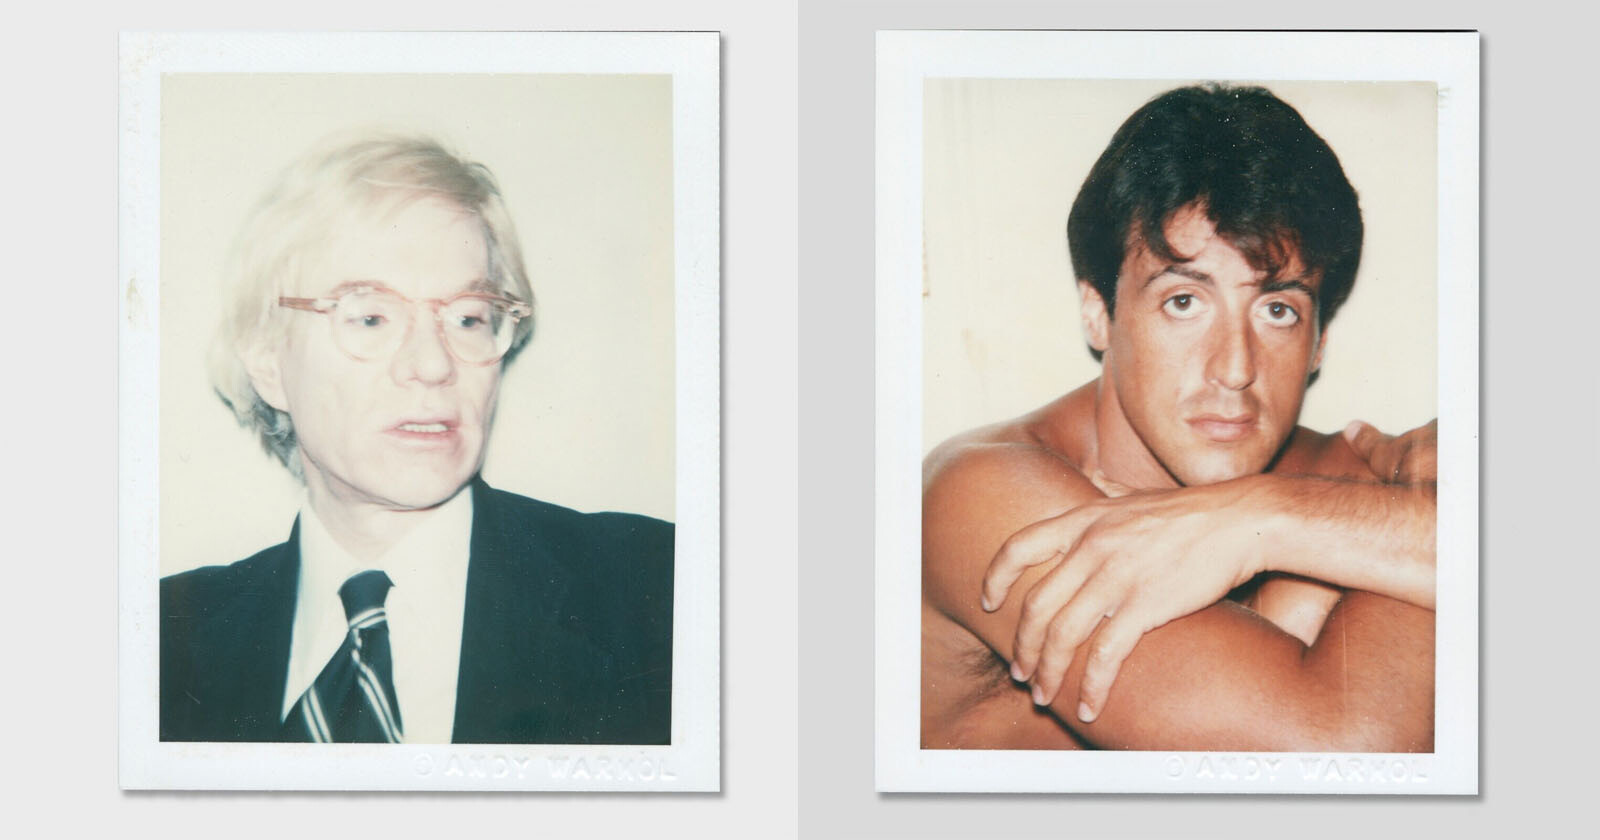 50 of Andy Warhols Polaroids, Prints, Books, and More Are For Sale on eBay